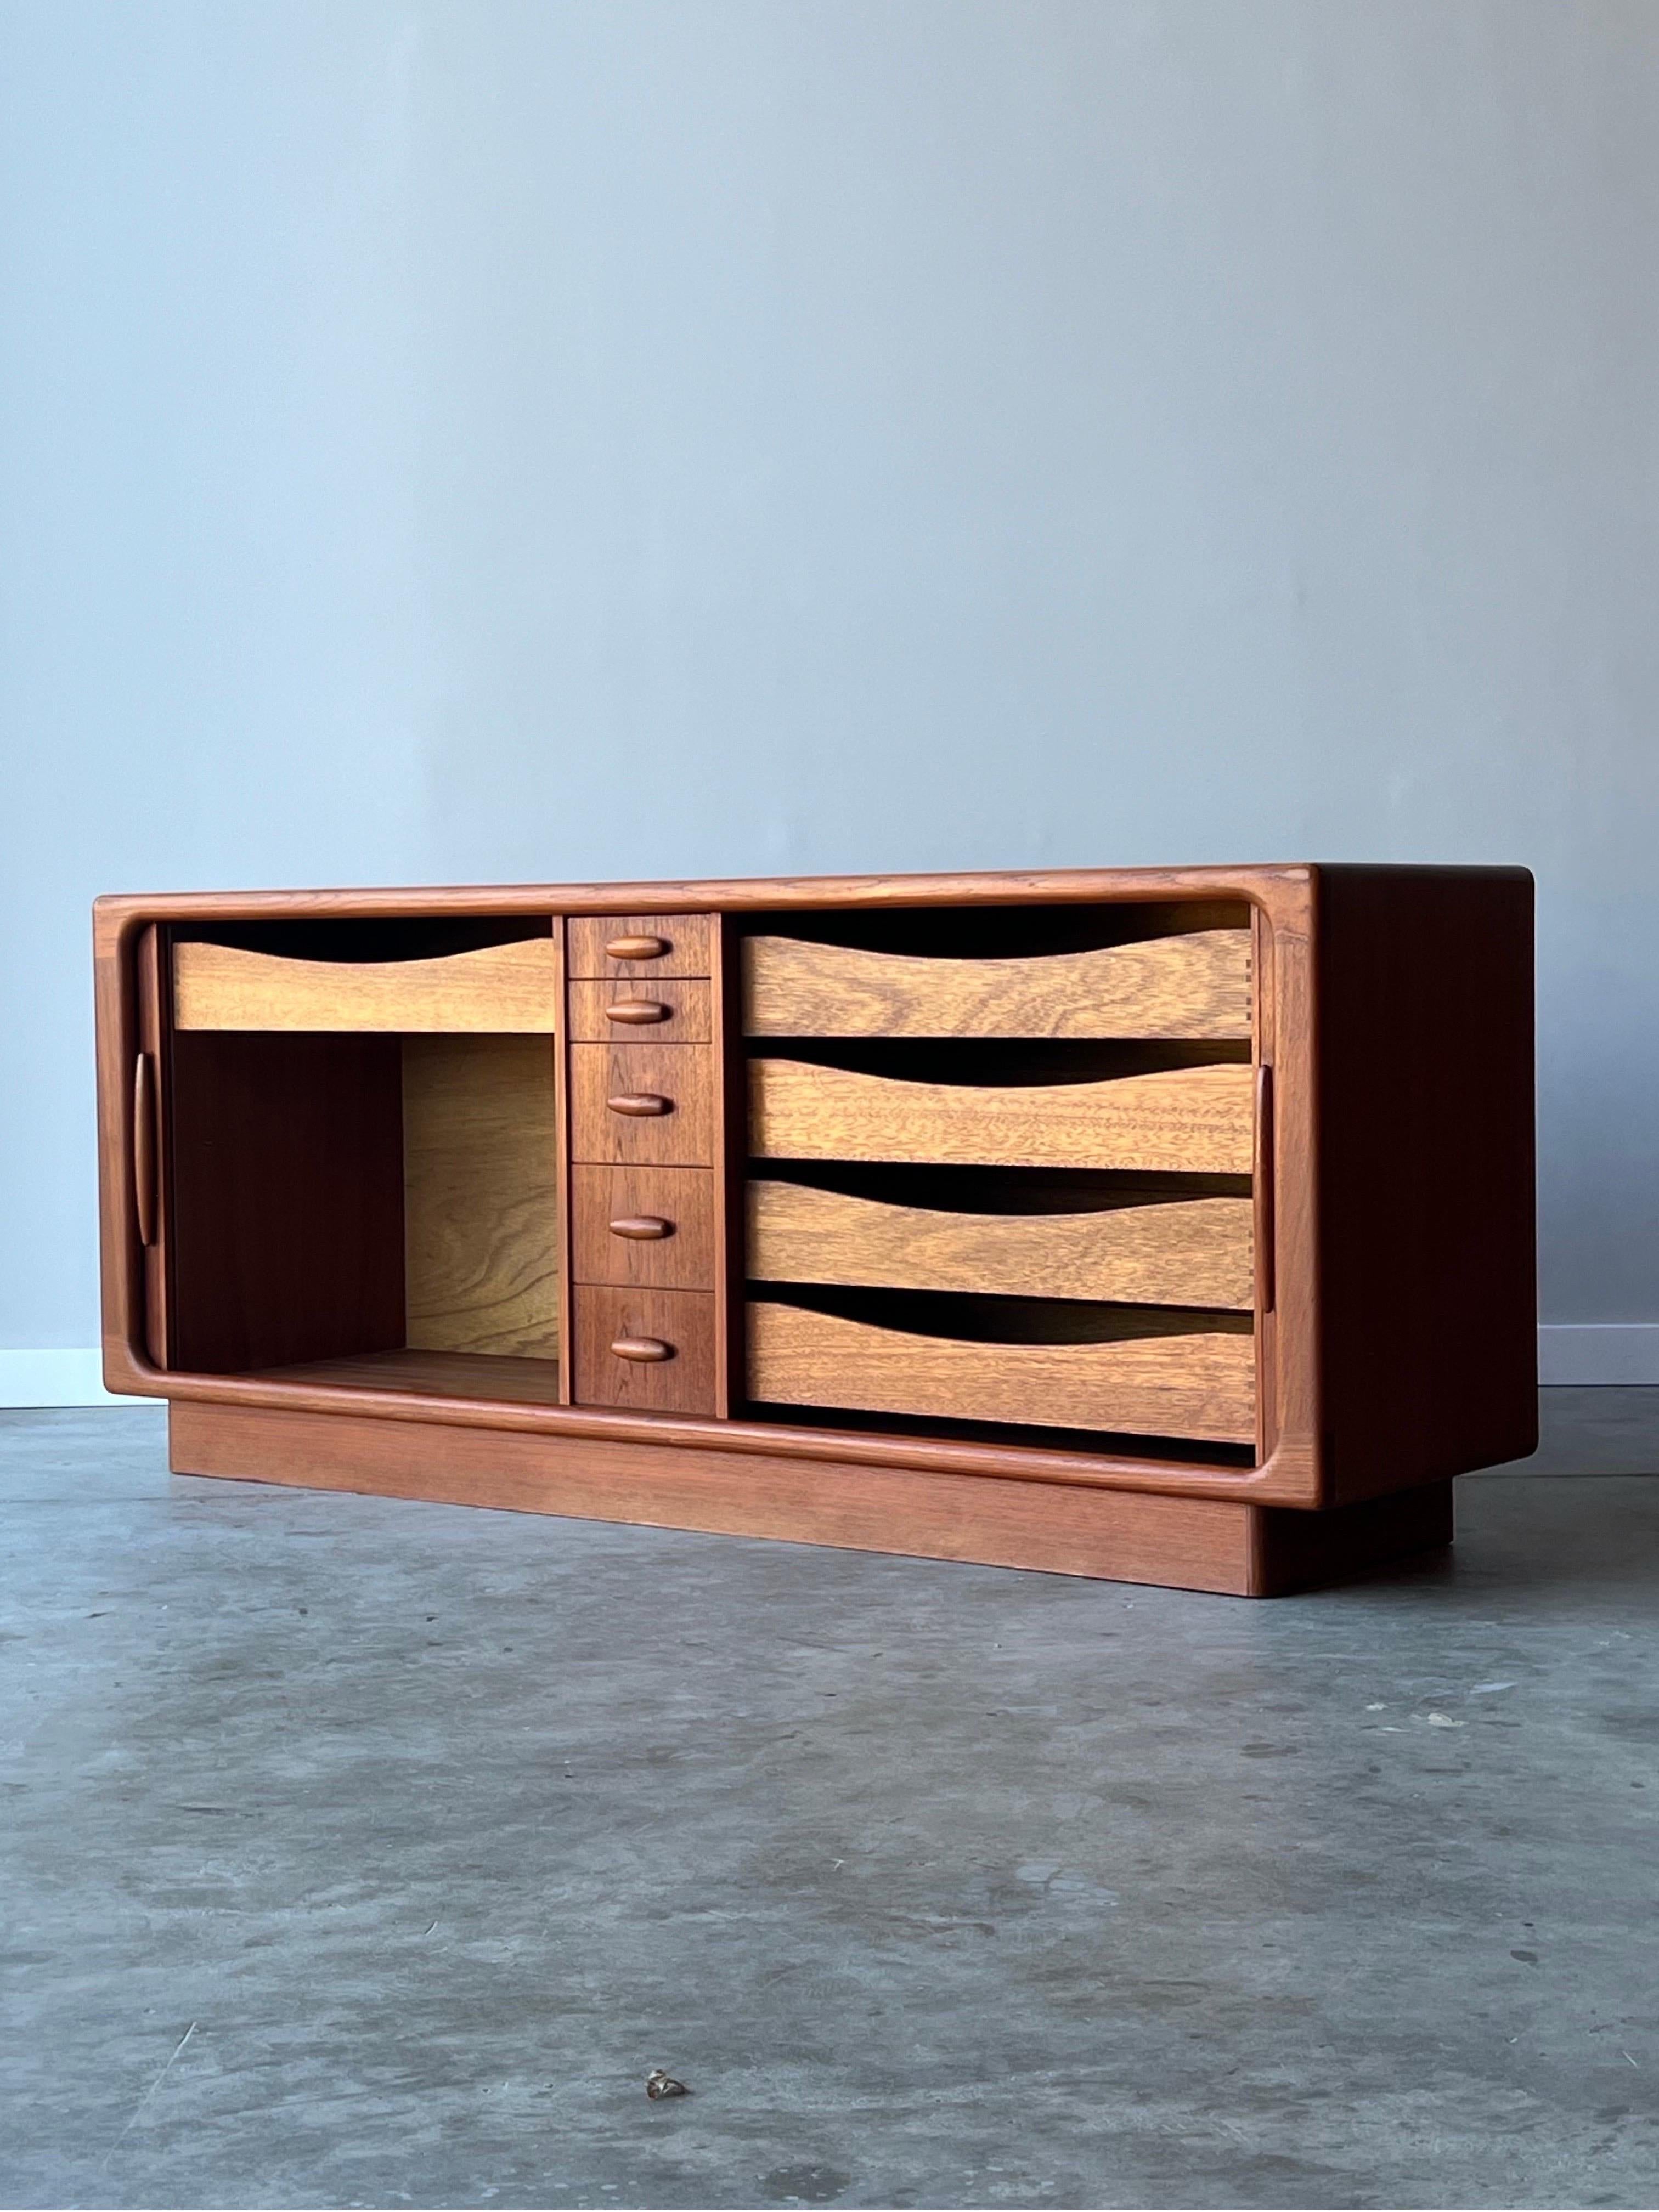 Elegant and stately case piece made by Dyrlund, Denmark. Made from Danish teak wood, circa 1970s. This piece could be used as a traditional dresser, sideboard, or living room credenza as it is both aesthetically and functionally versatile. Tambour